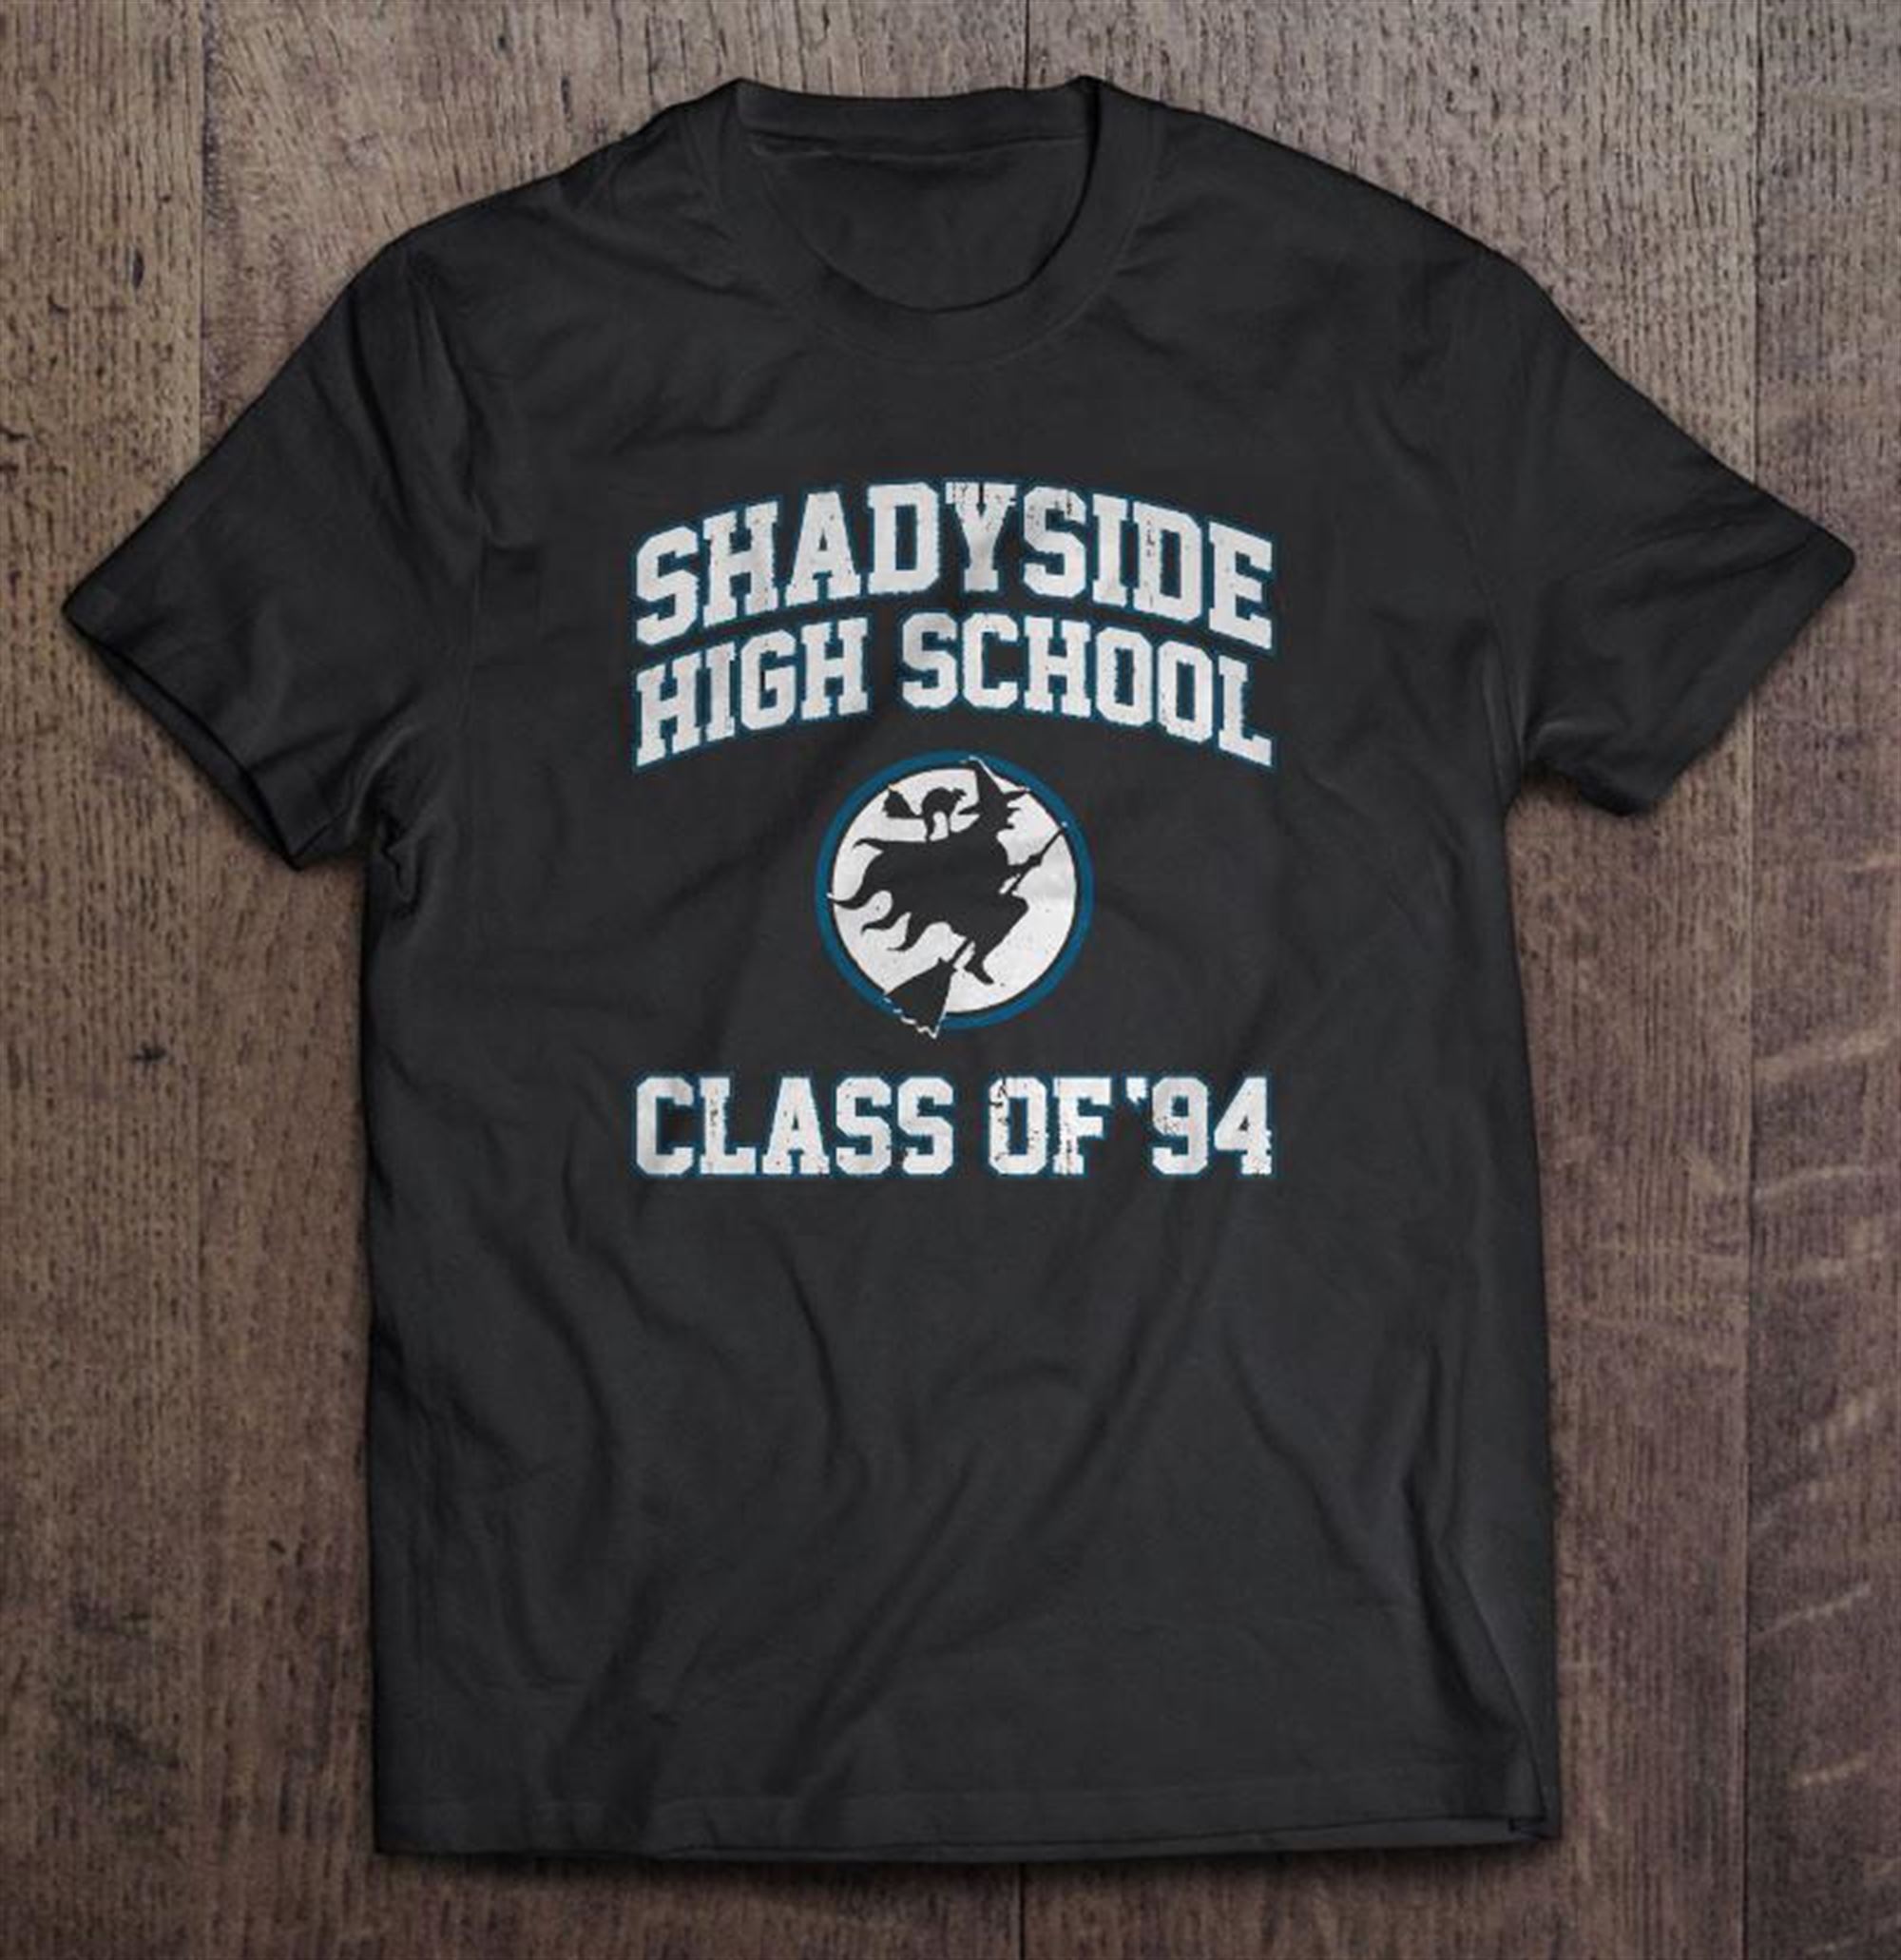 Shadyside High School Class Of 94 T-shirt Size Up To 5xl